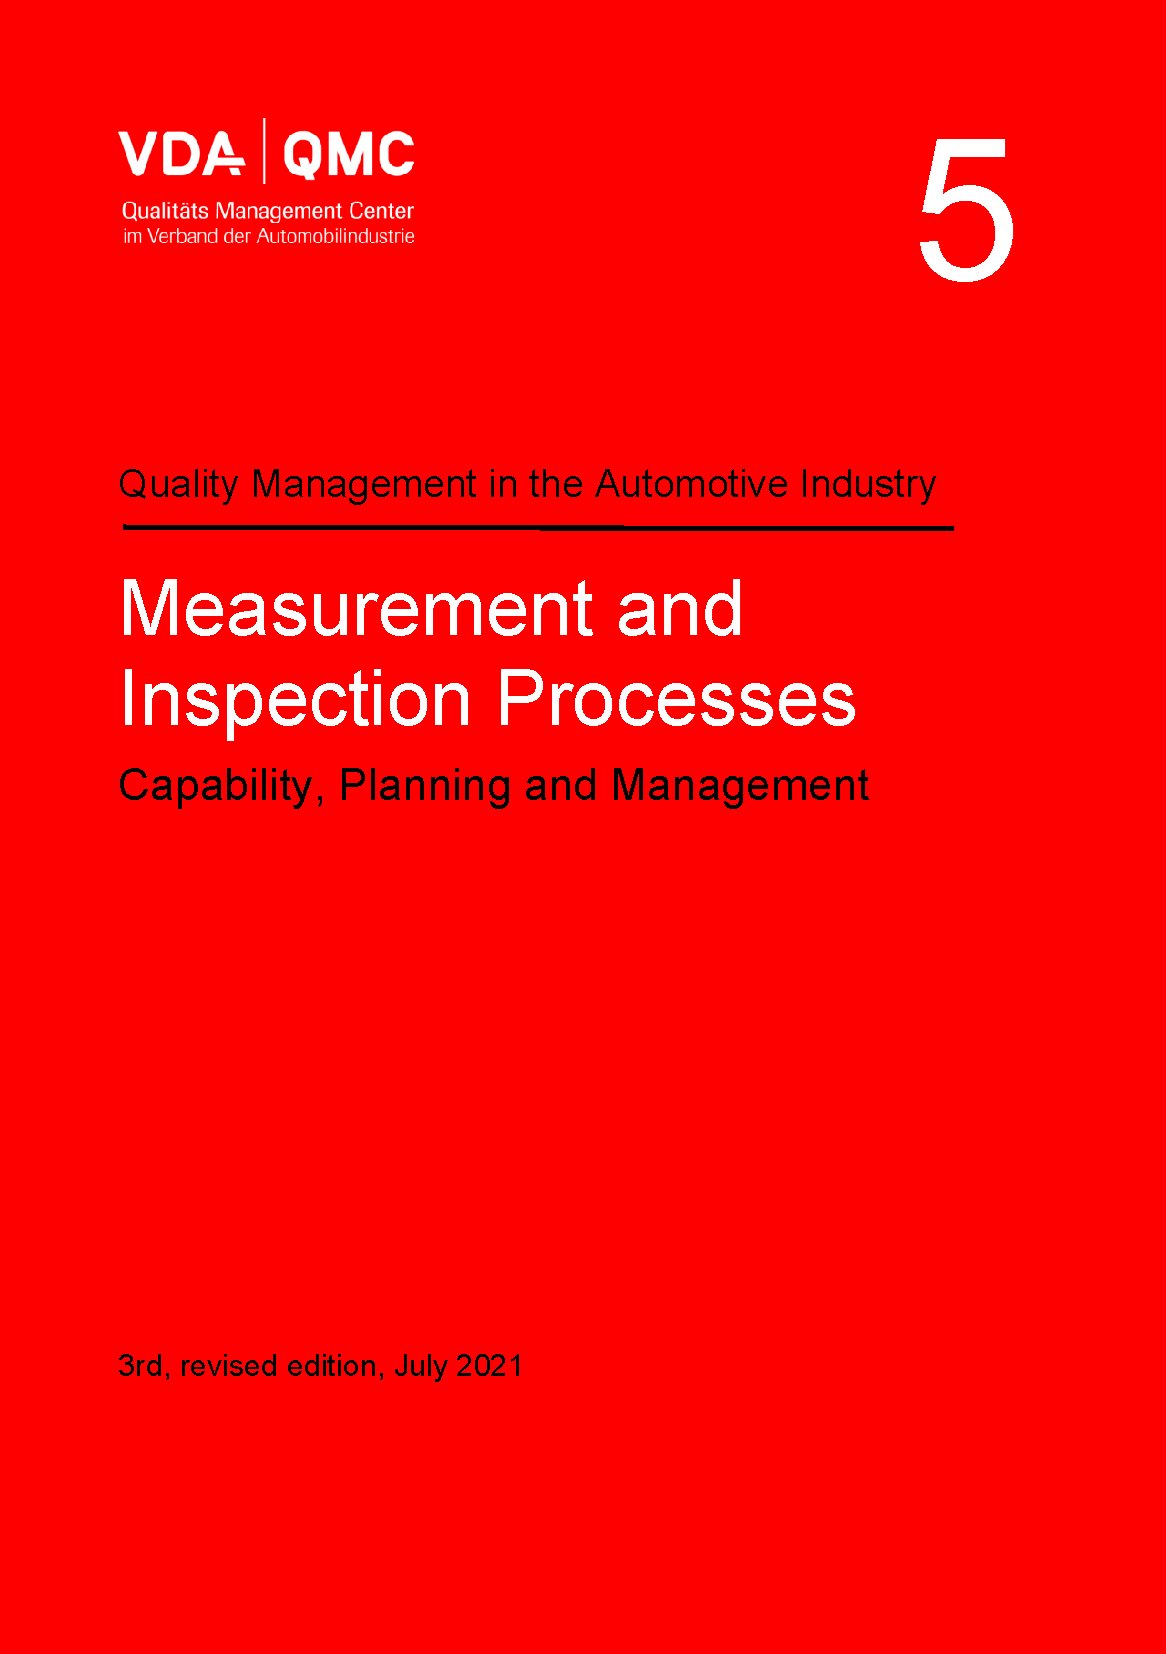 Náhľad  VDA Volume 5 Measurement and Inspection Processes.
 Capability, Planning and Management, 3rd revised edition, July 2021 1.7.2021